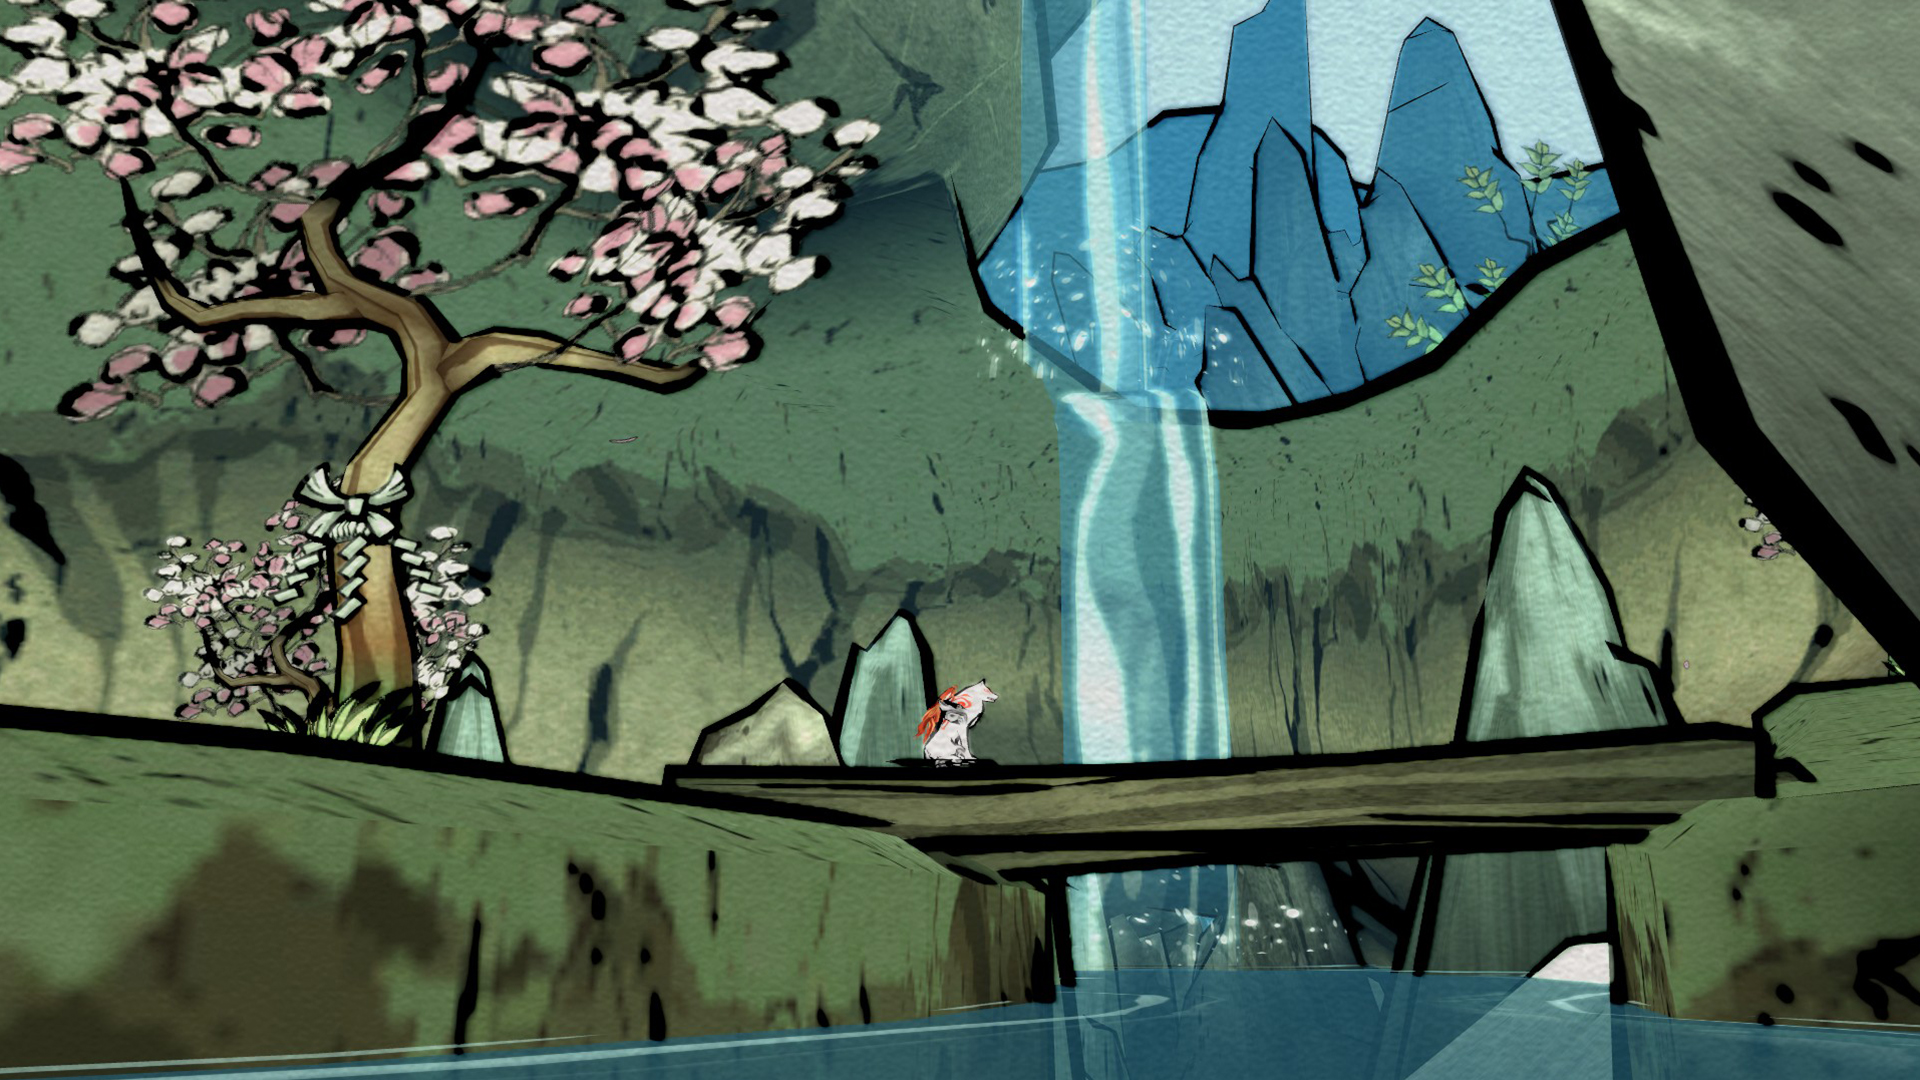 Okami Hd (Ps4) Review: The Littlest Hobo Of Our Times 3